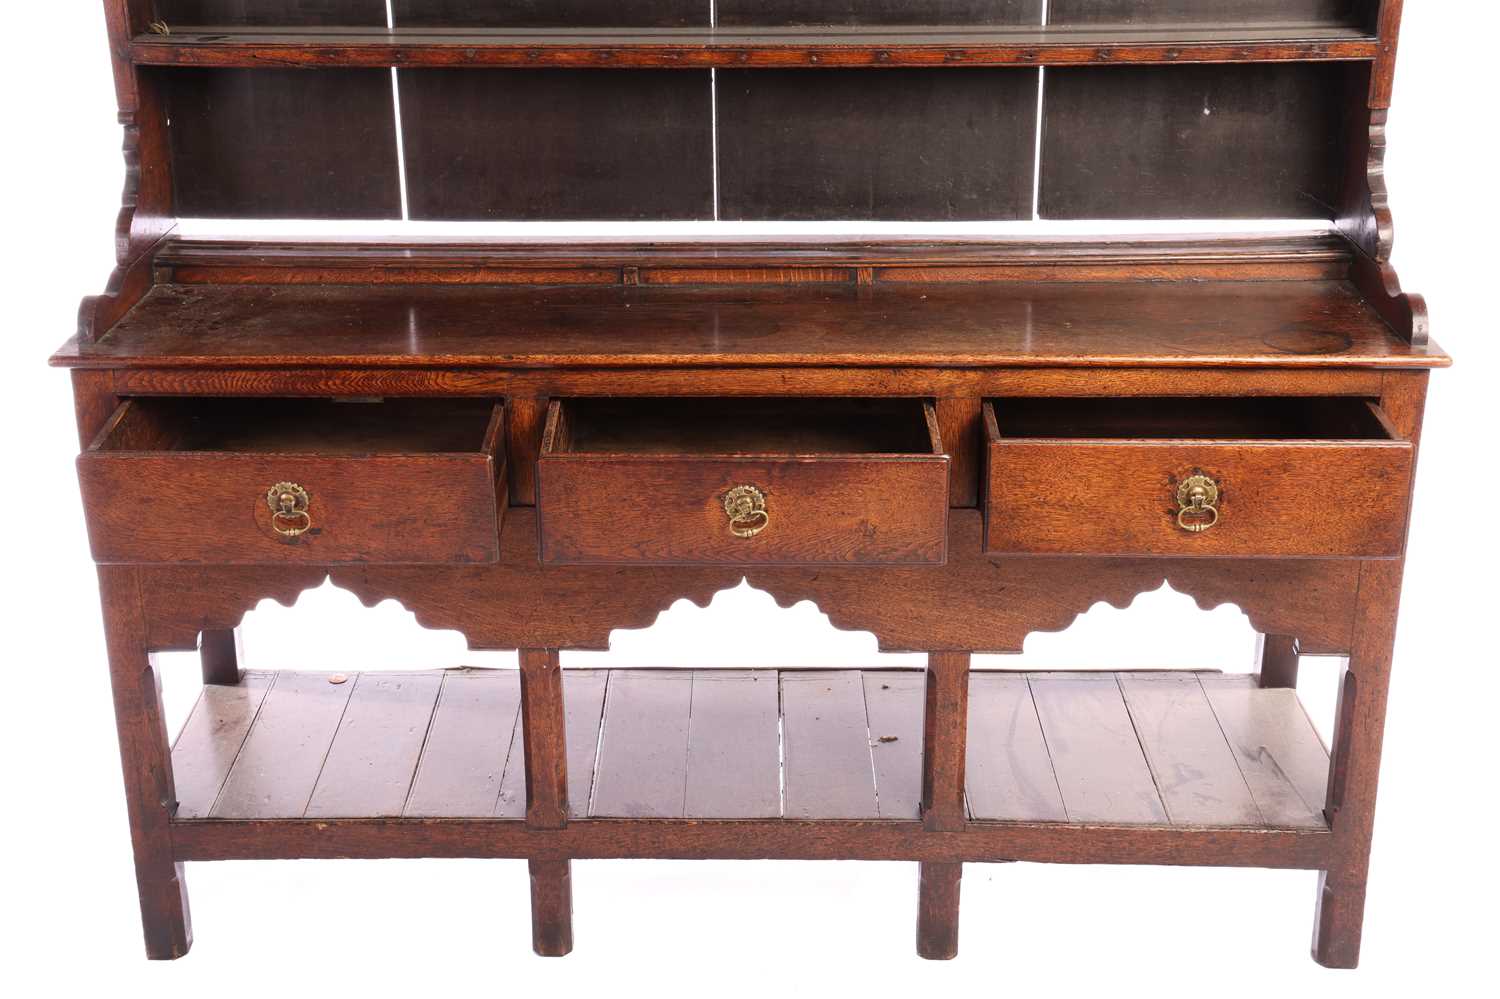 A George III oak pot board dresser and Delft rack, the moulded cornice over three shelves with hooks - Image 4 of 8